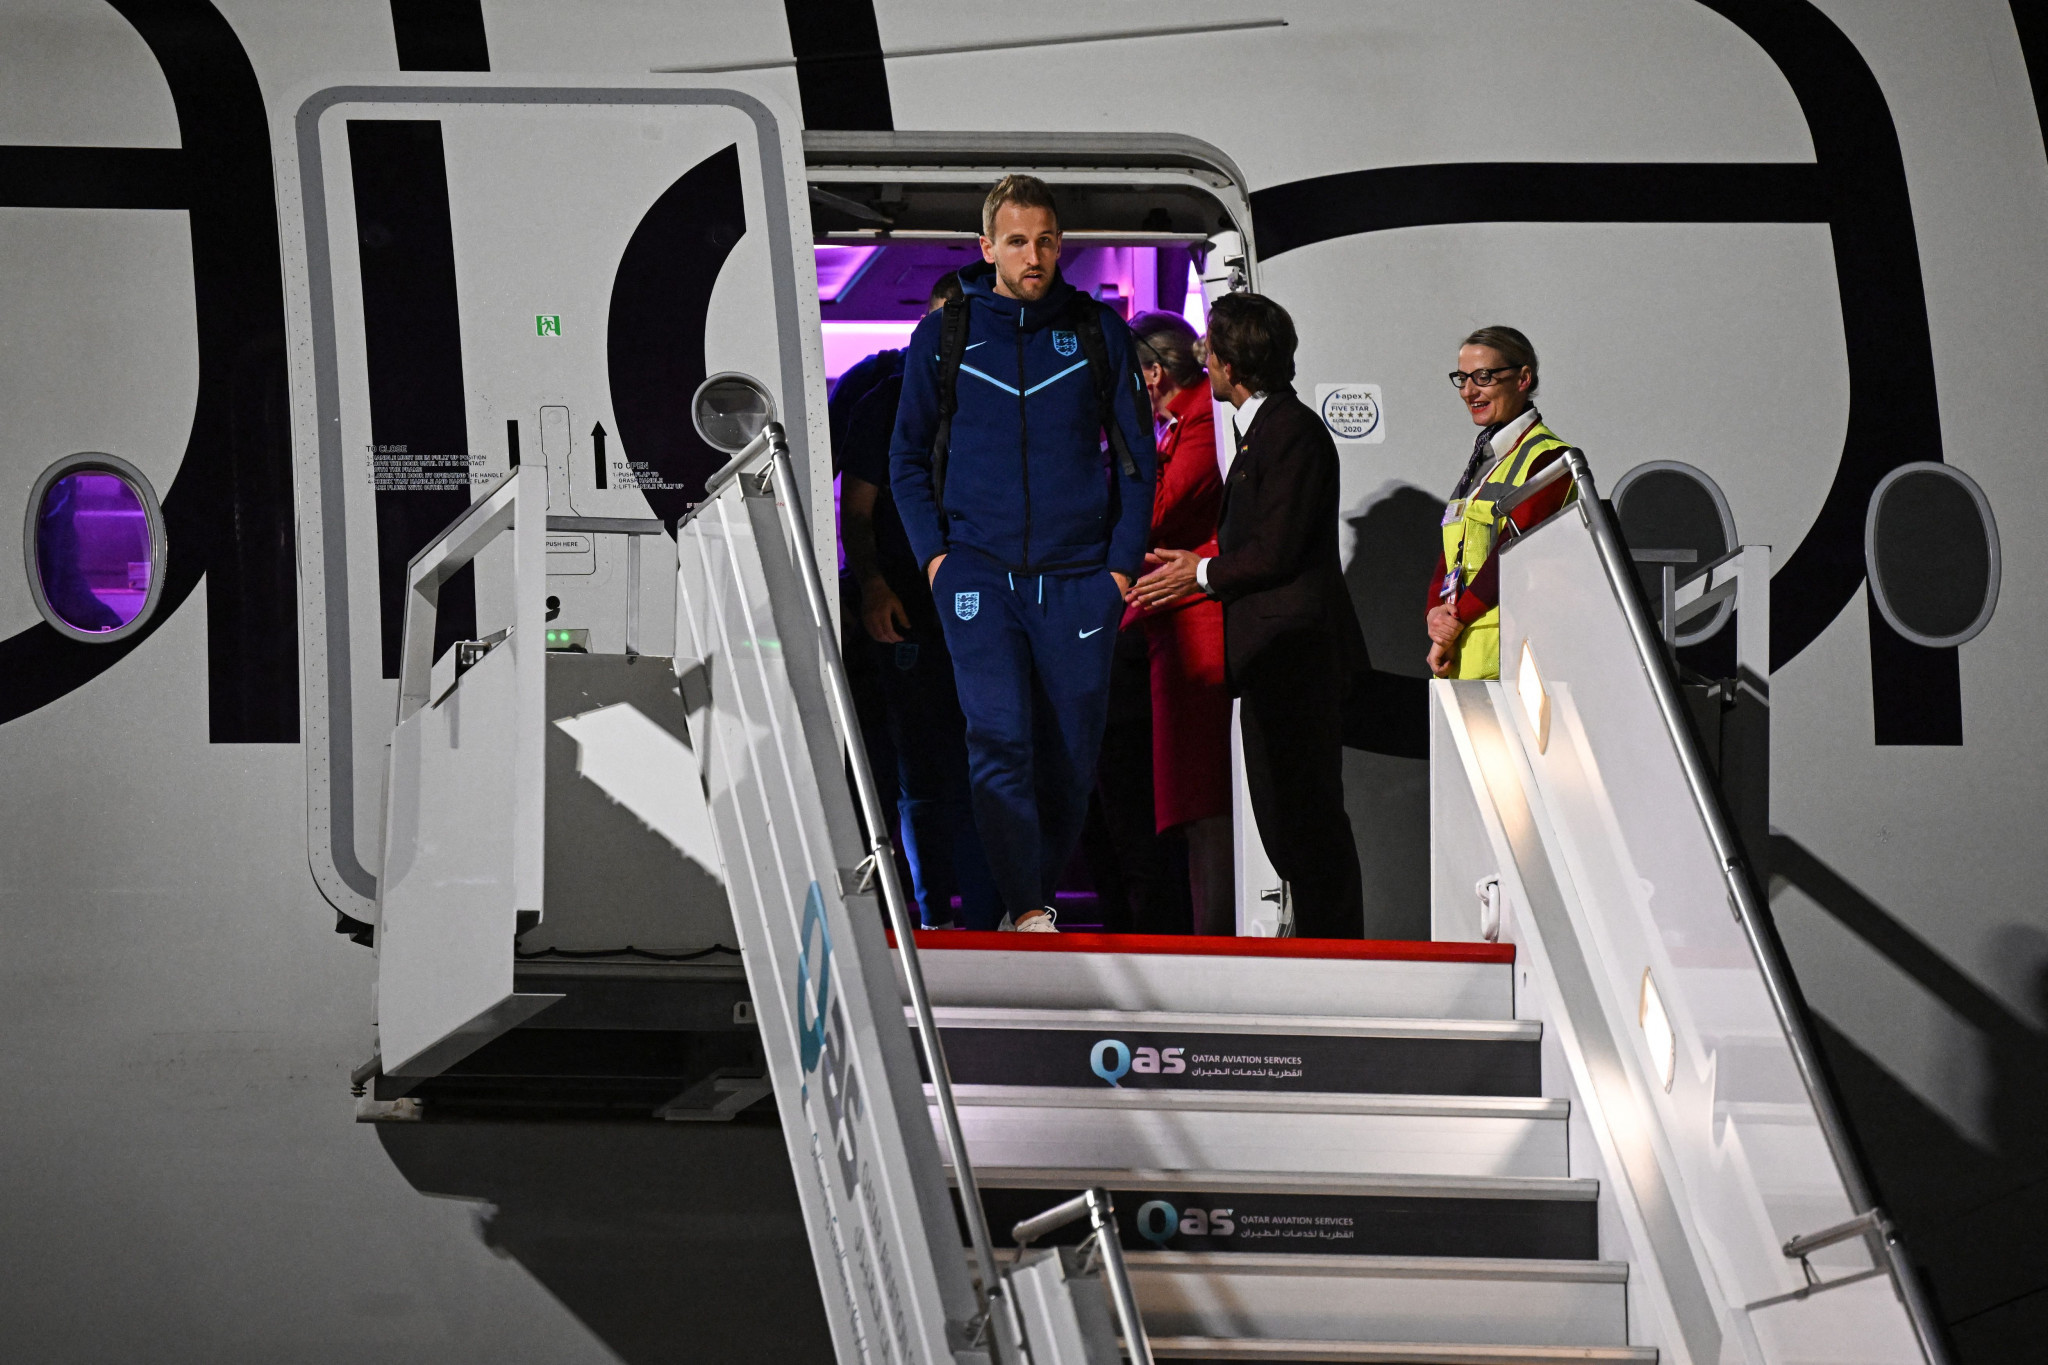 England team arrive in Qatar in Gay Pride plane prior to World Cup kickoff